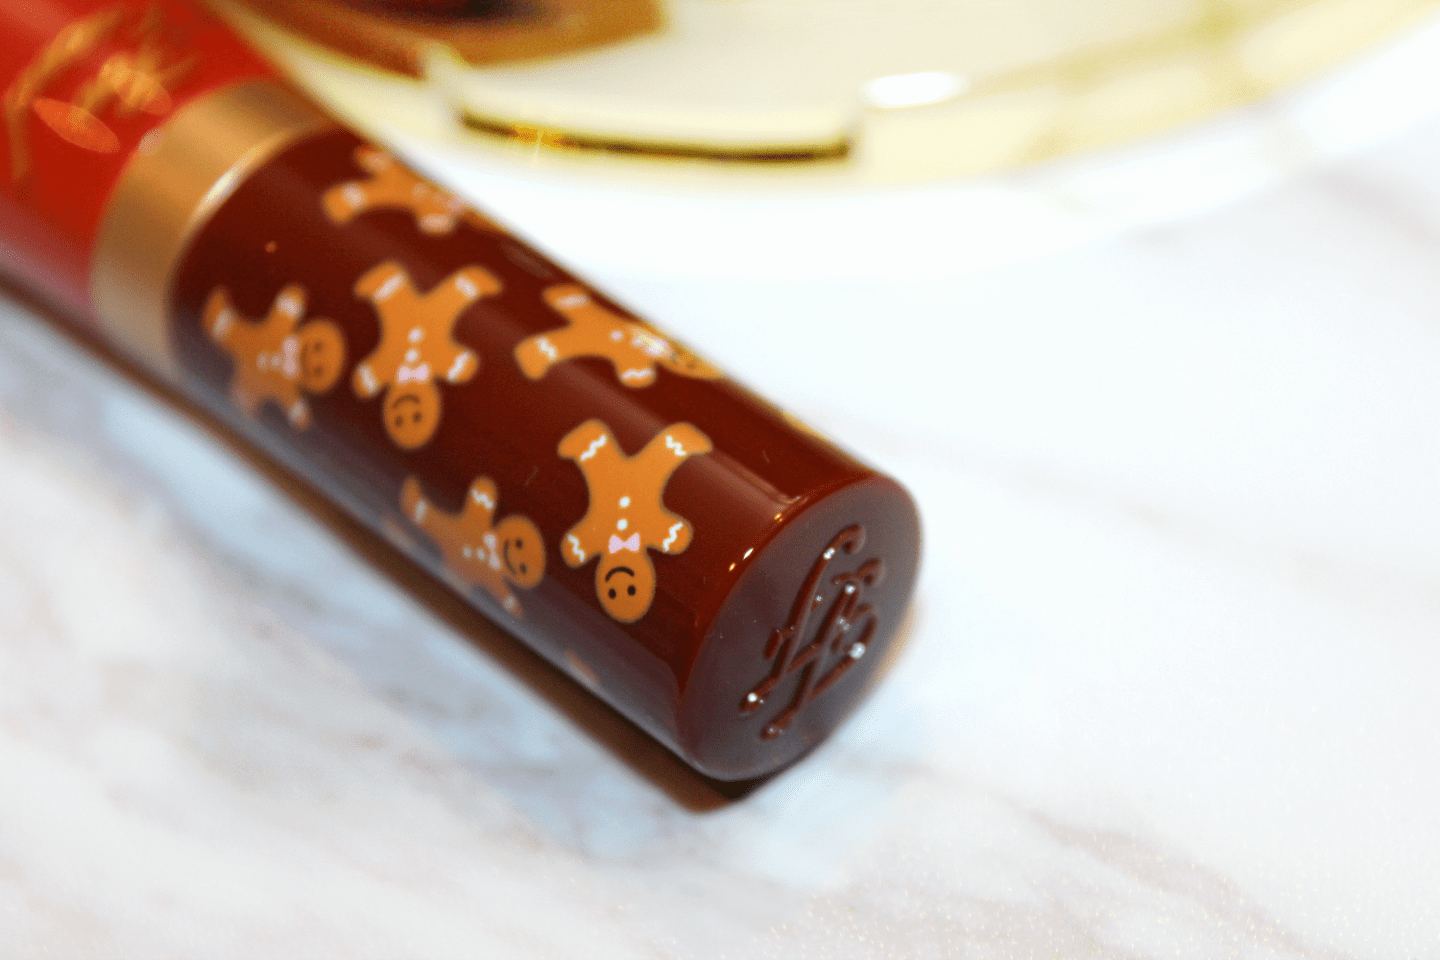 Too-Faced-Gingerbread-Man-Lipstick-Review